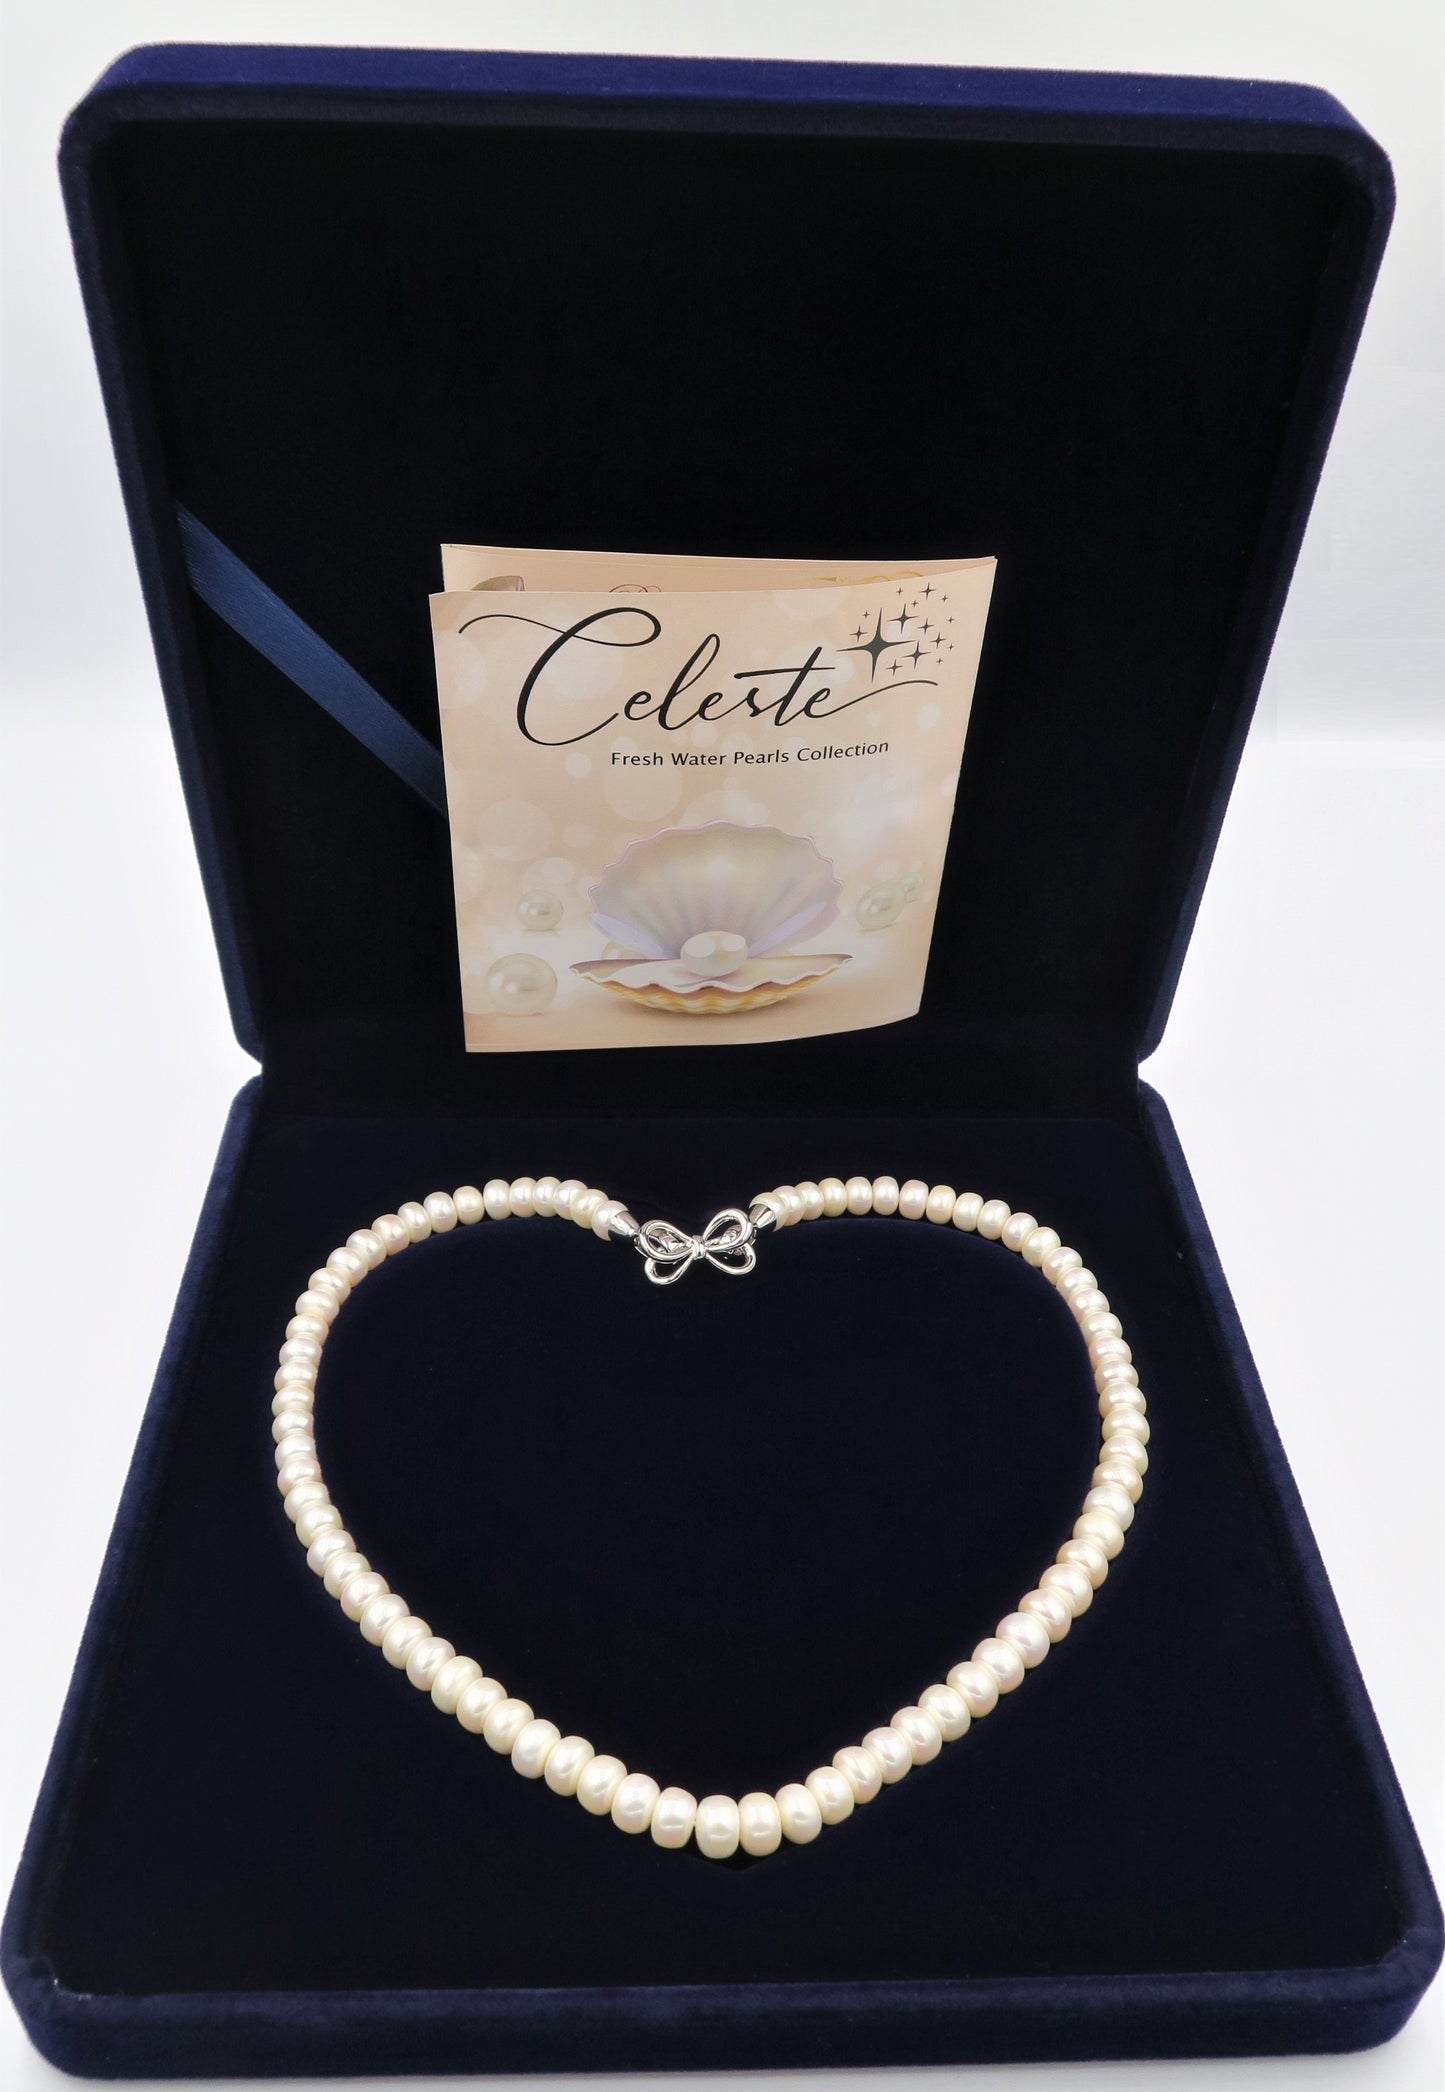 PA - Real Fresh Water Pearl Necklace bow butterfly Celeste 925 Sterling Silver White Pink Purple gift Set